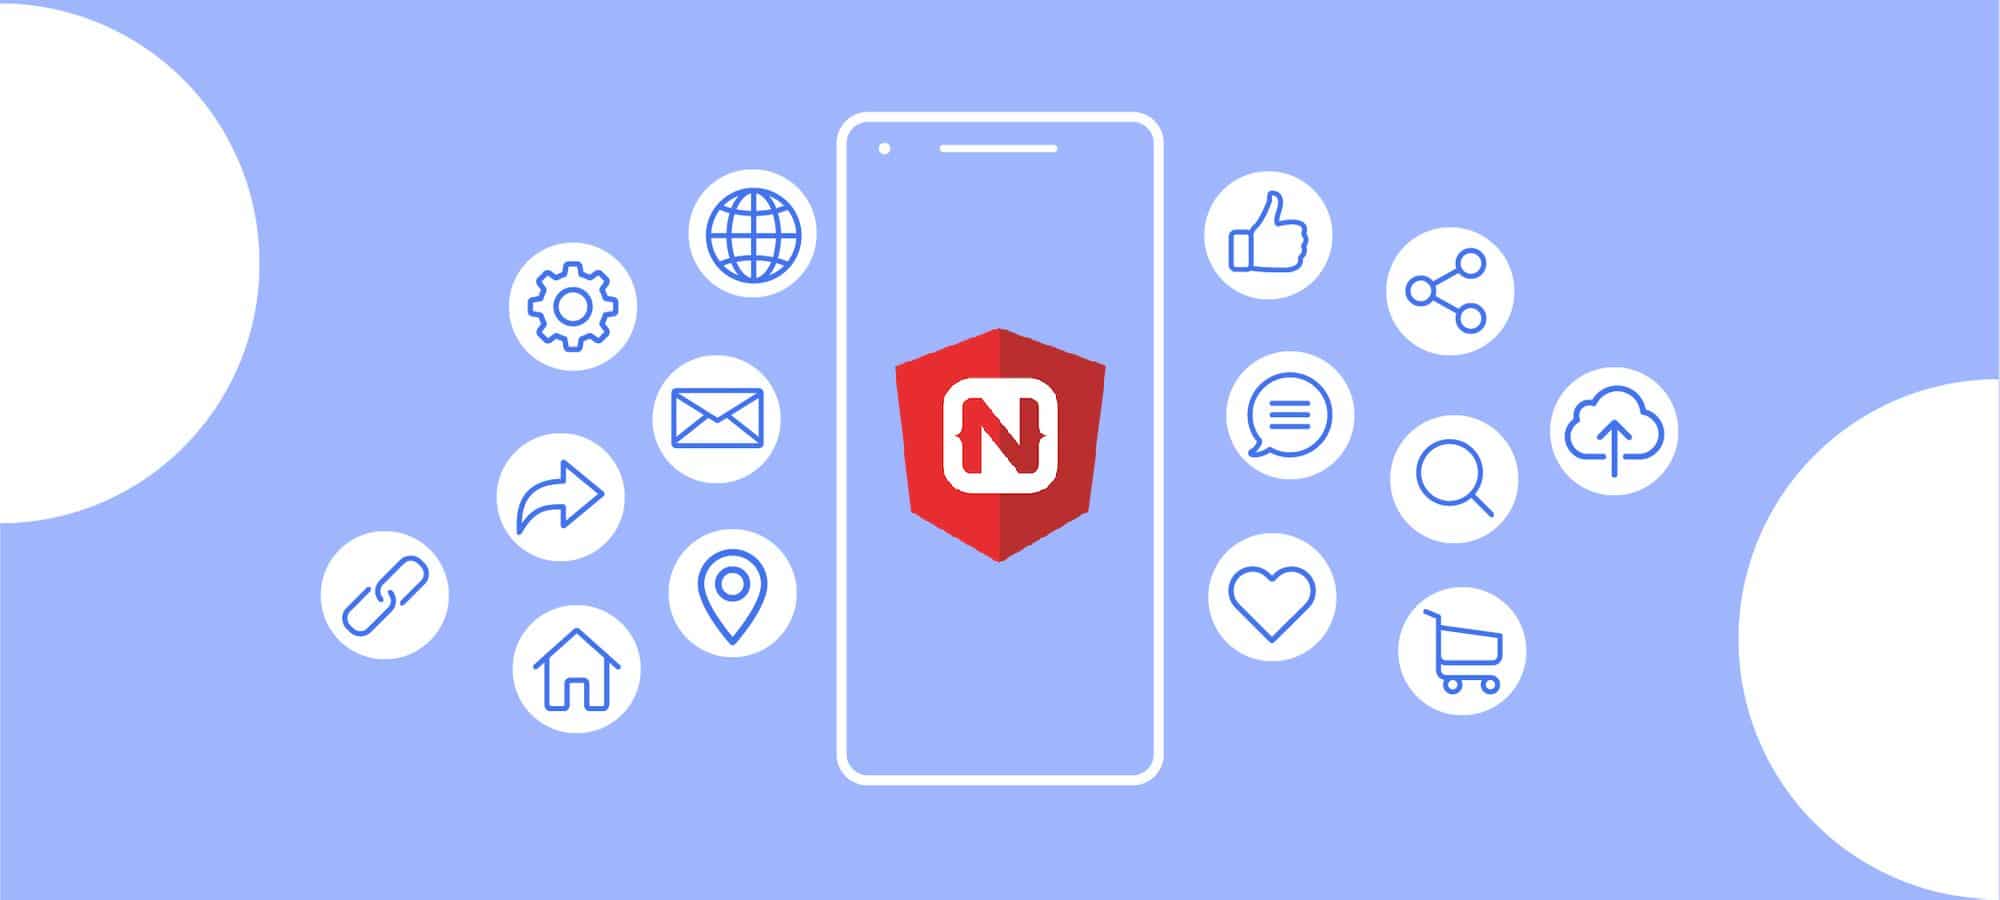 Native Android and iOS Apps with NativeScript and Angular 6